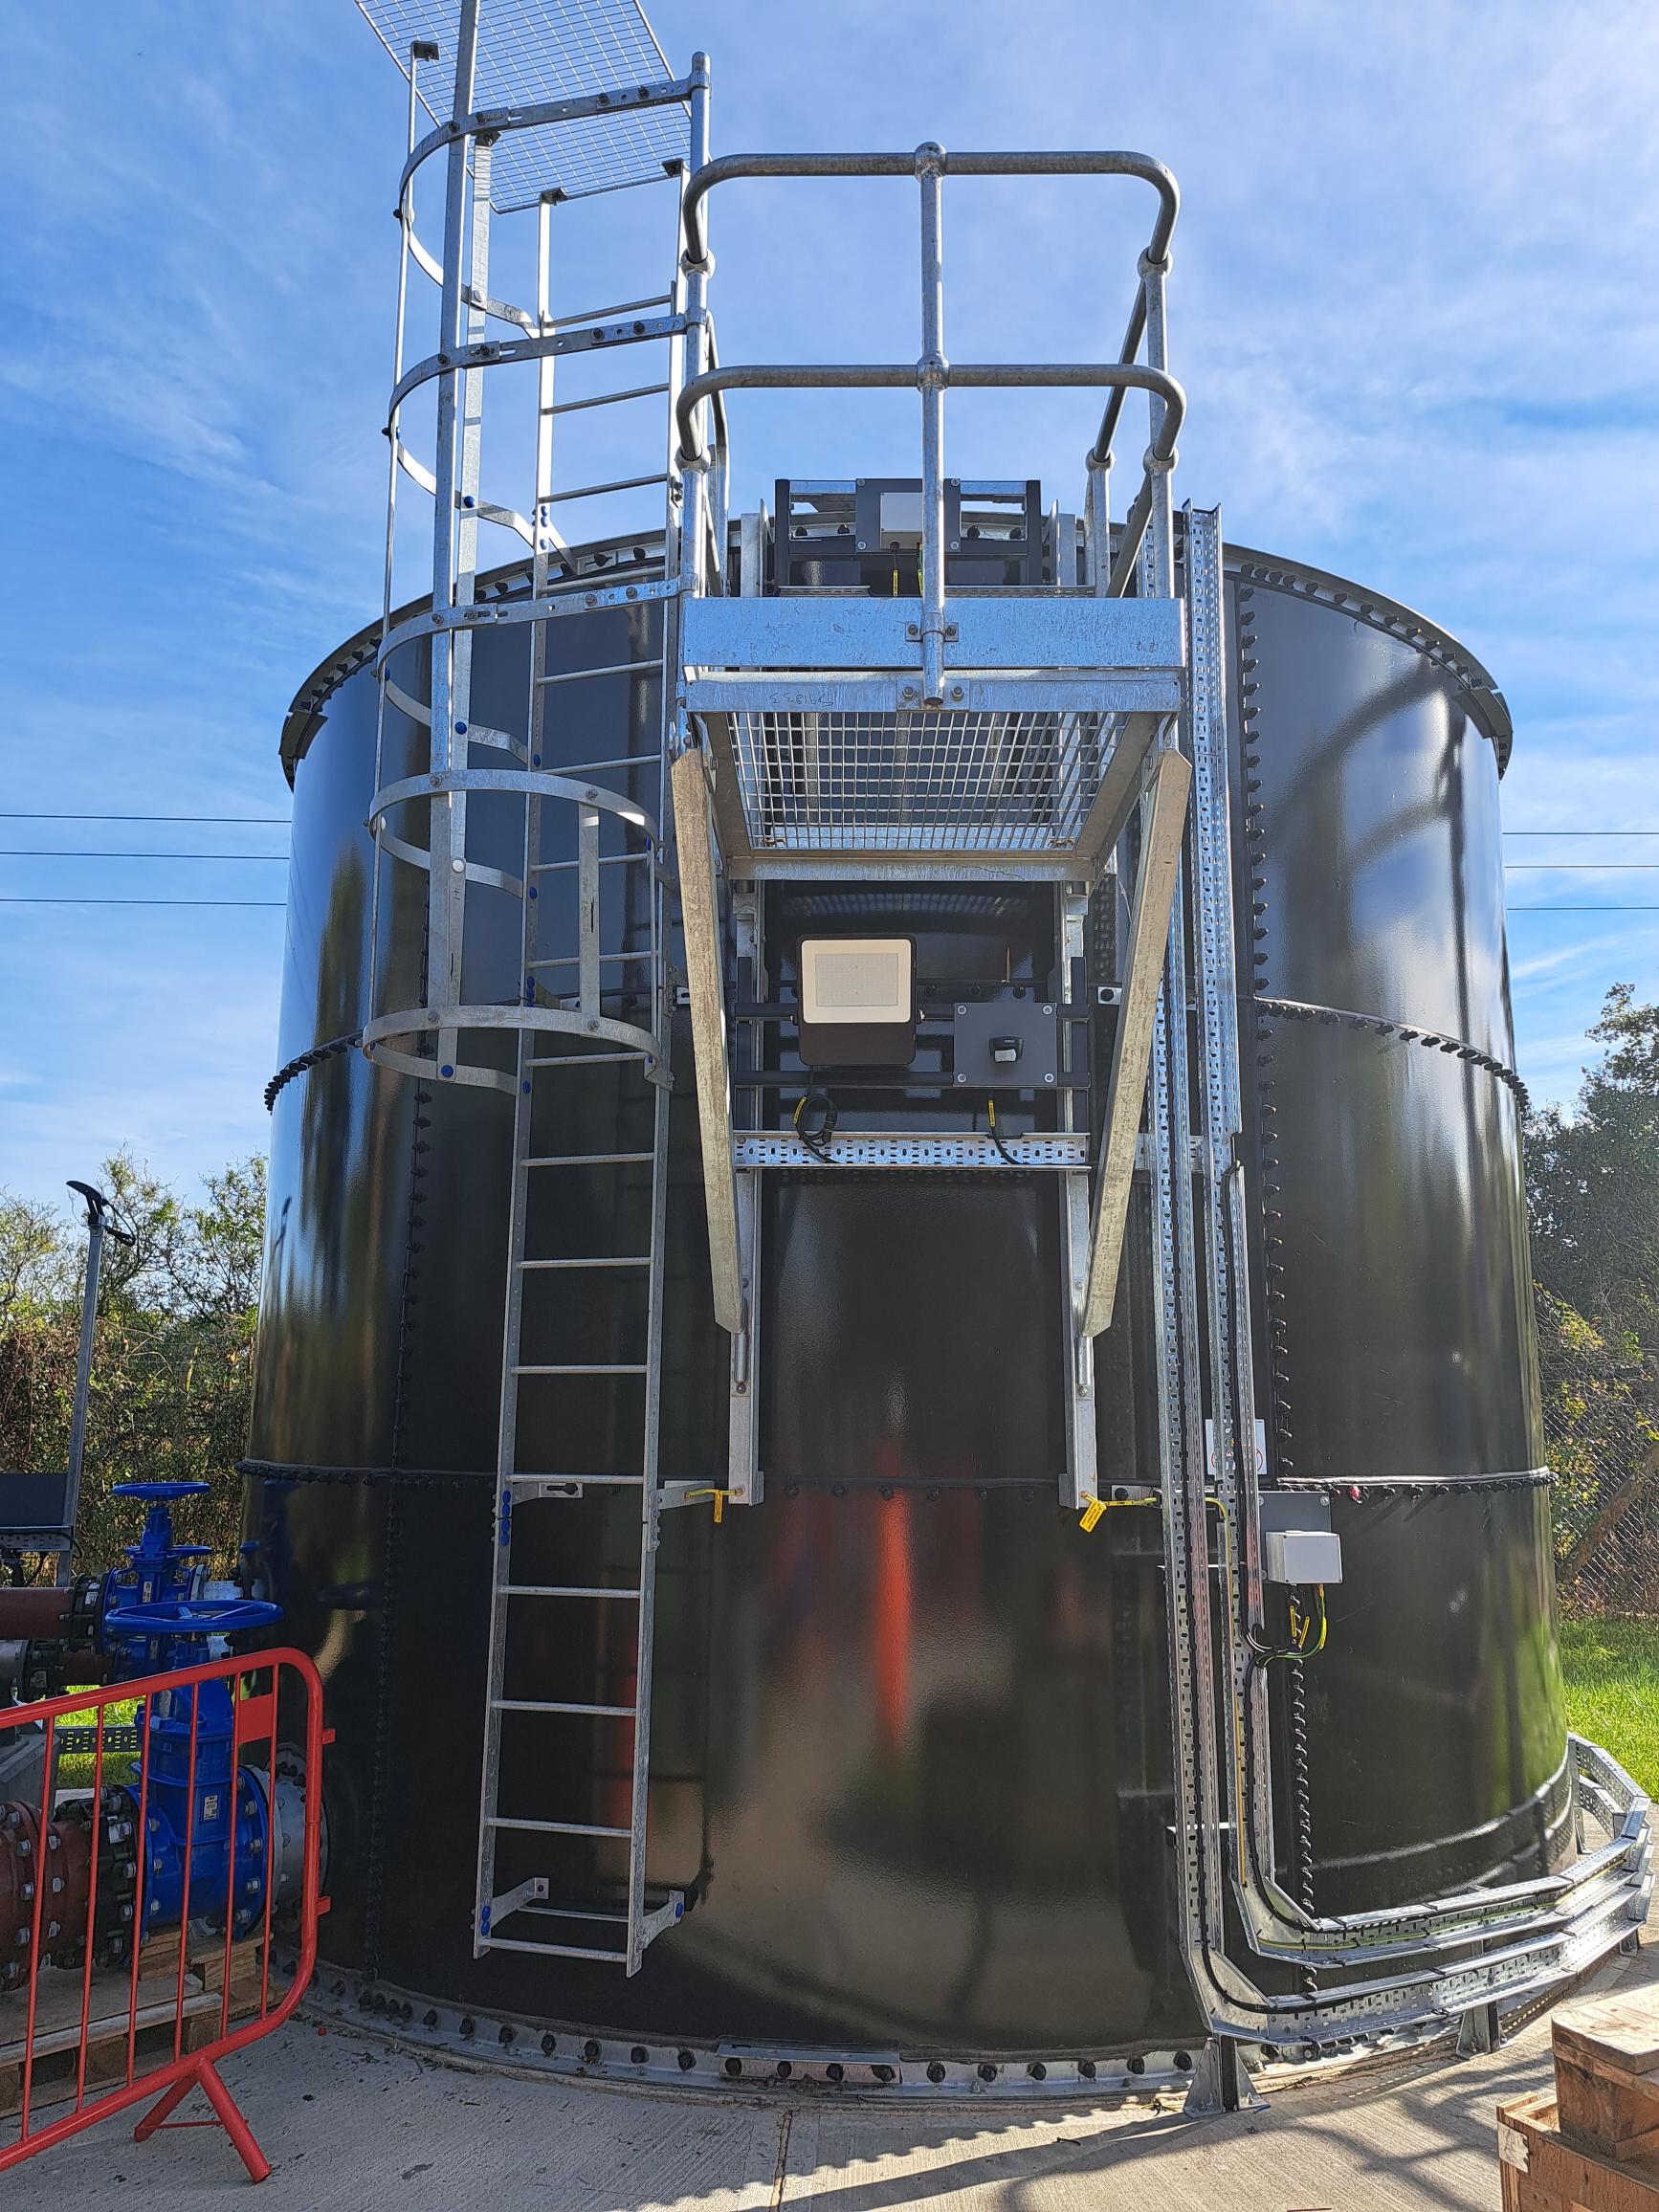 Water Storage Tanks: A Vital Part of Our Infrastructure (Part II